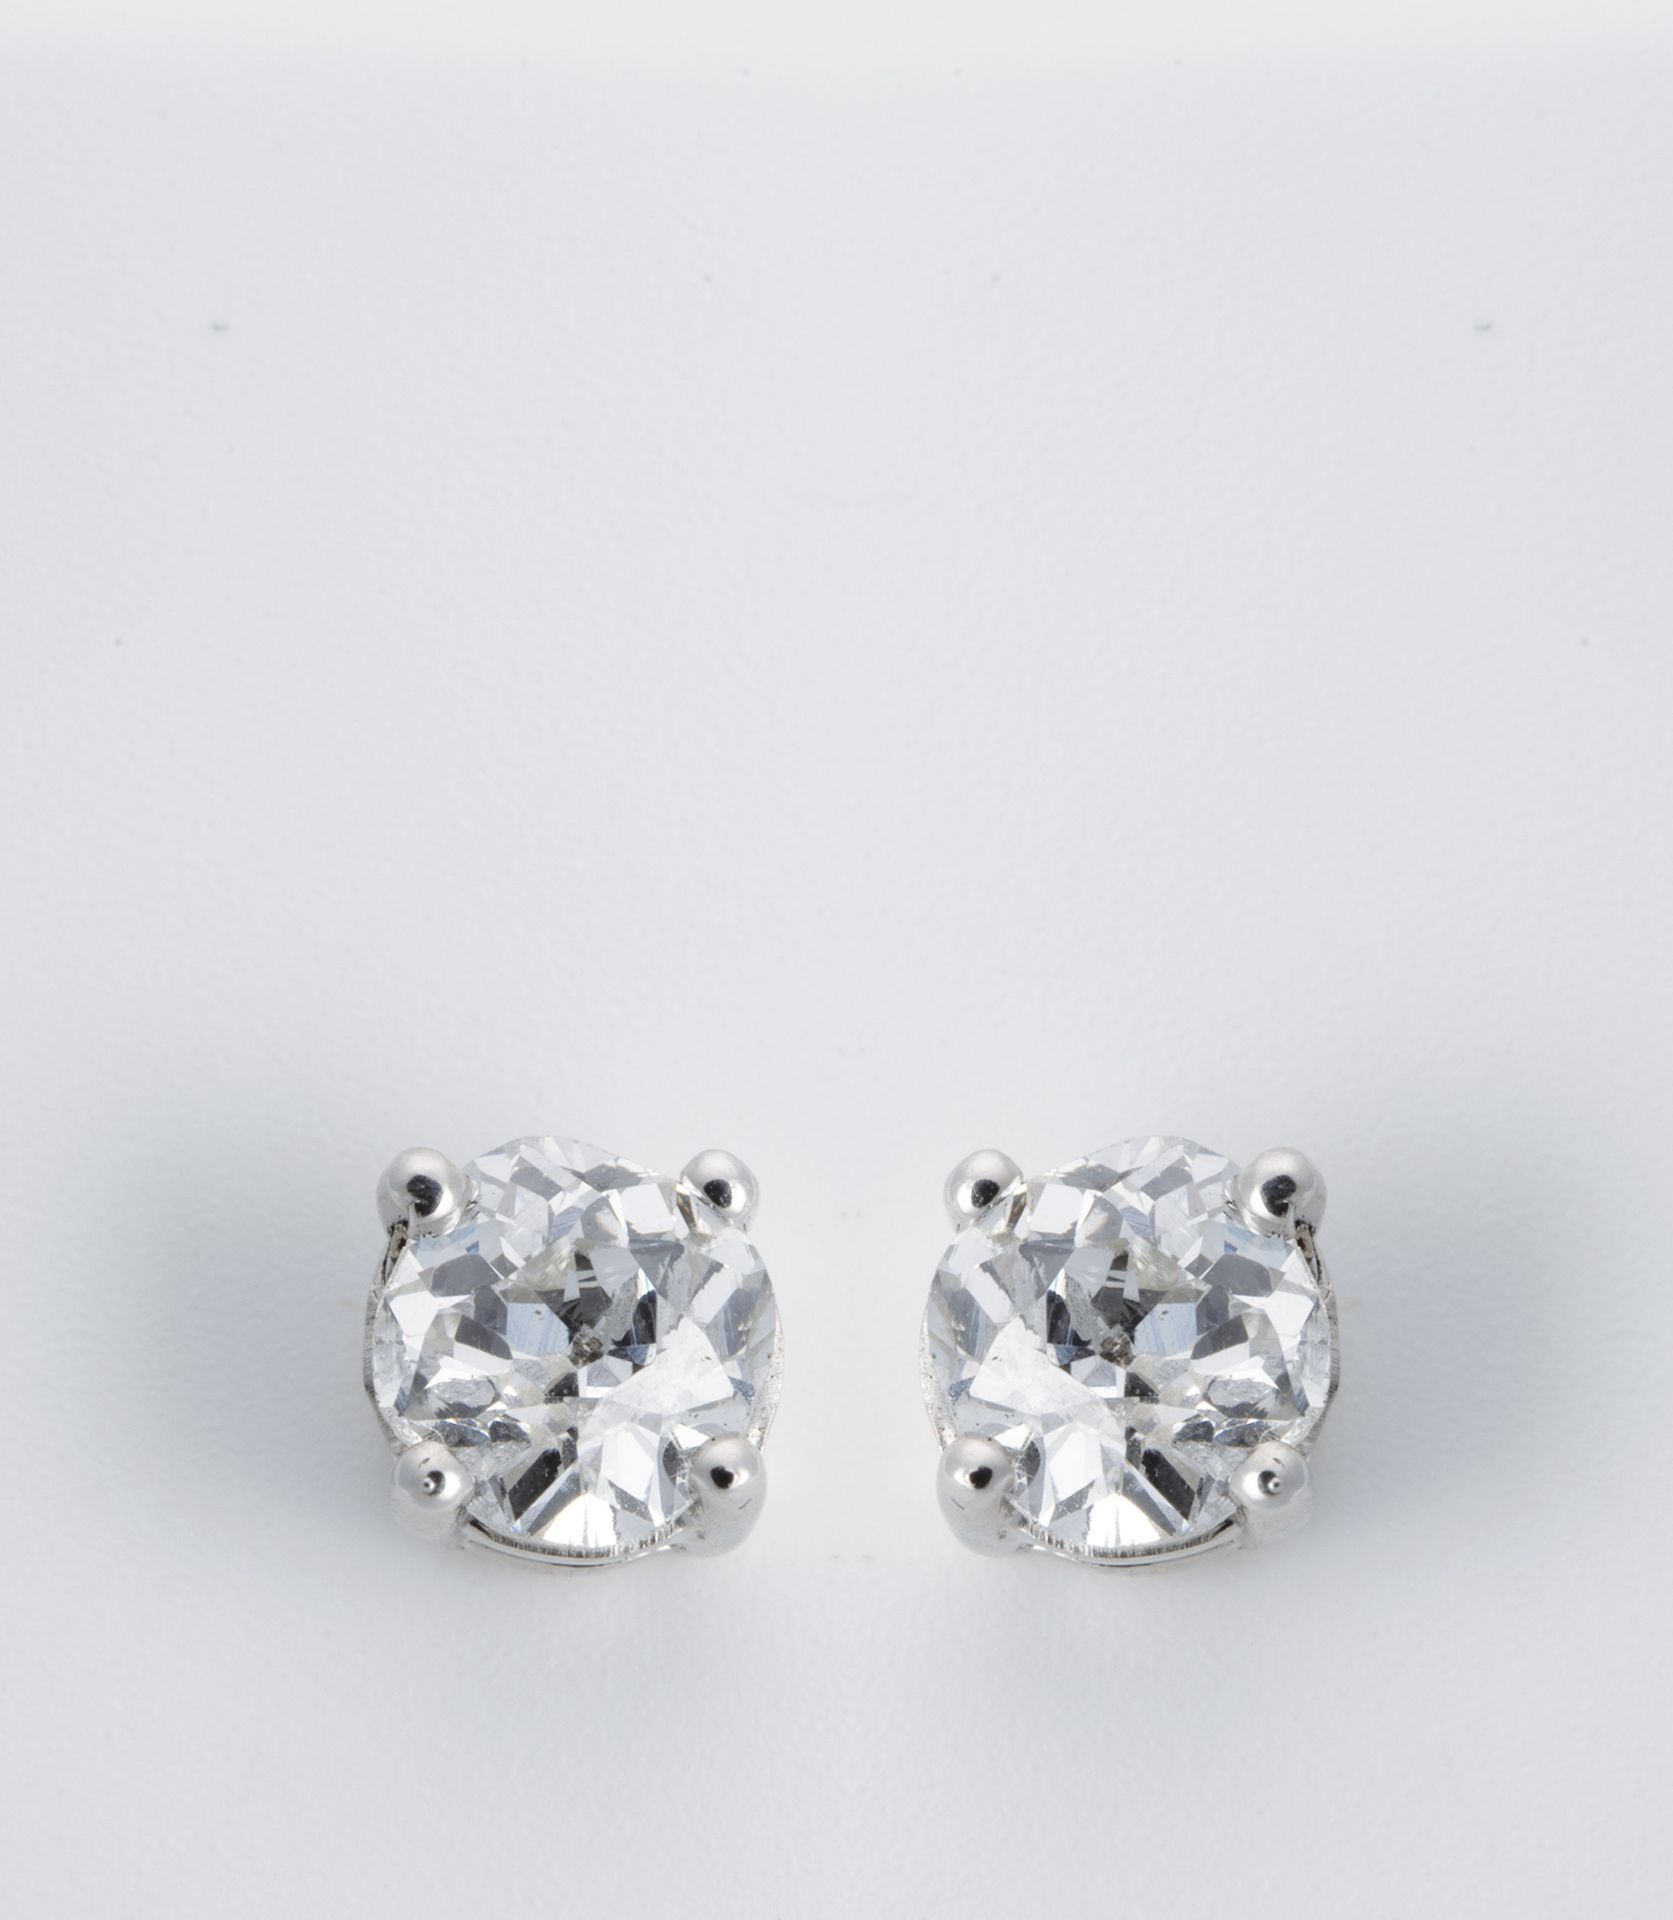 Stud earrings with diamond solitaire